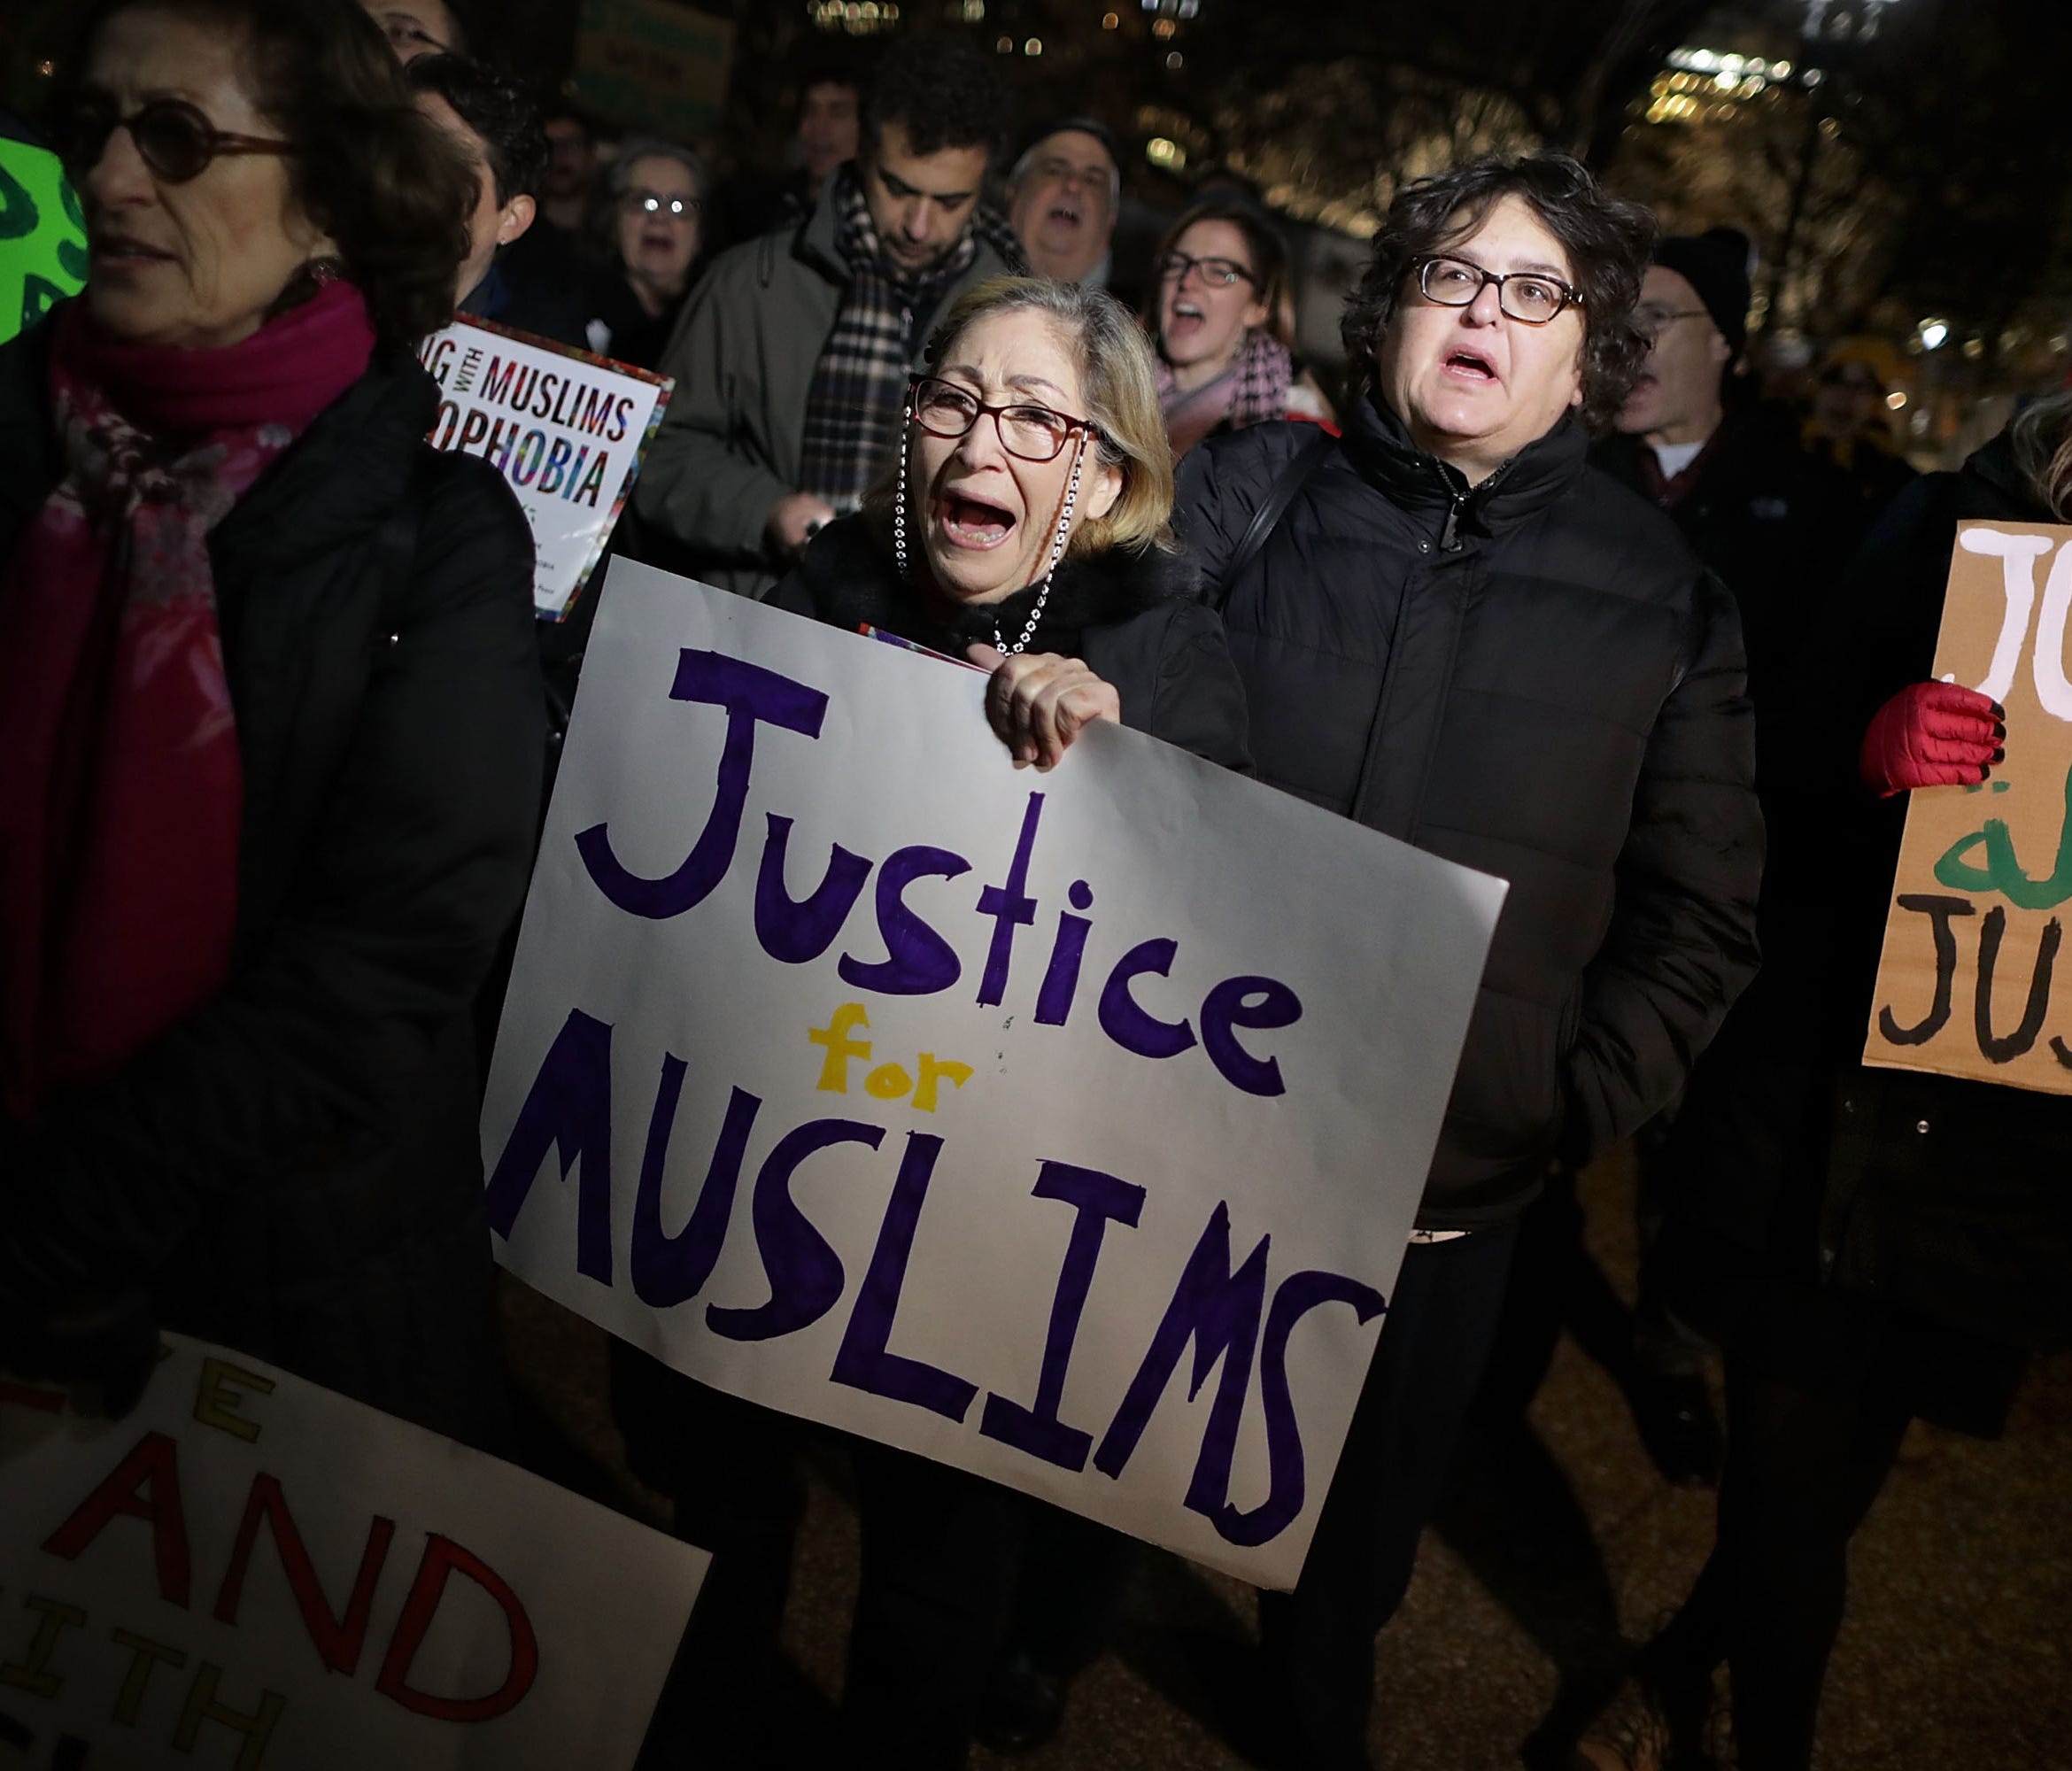 About 60 demonstrators organized by Jewish Voice for Peace gathered outside the White House to stand 'with Muslims against Islamophobia and racism' on Dec. 21, 2016, in Washington.